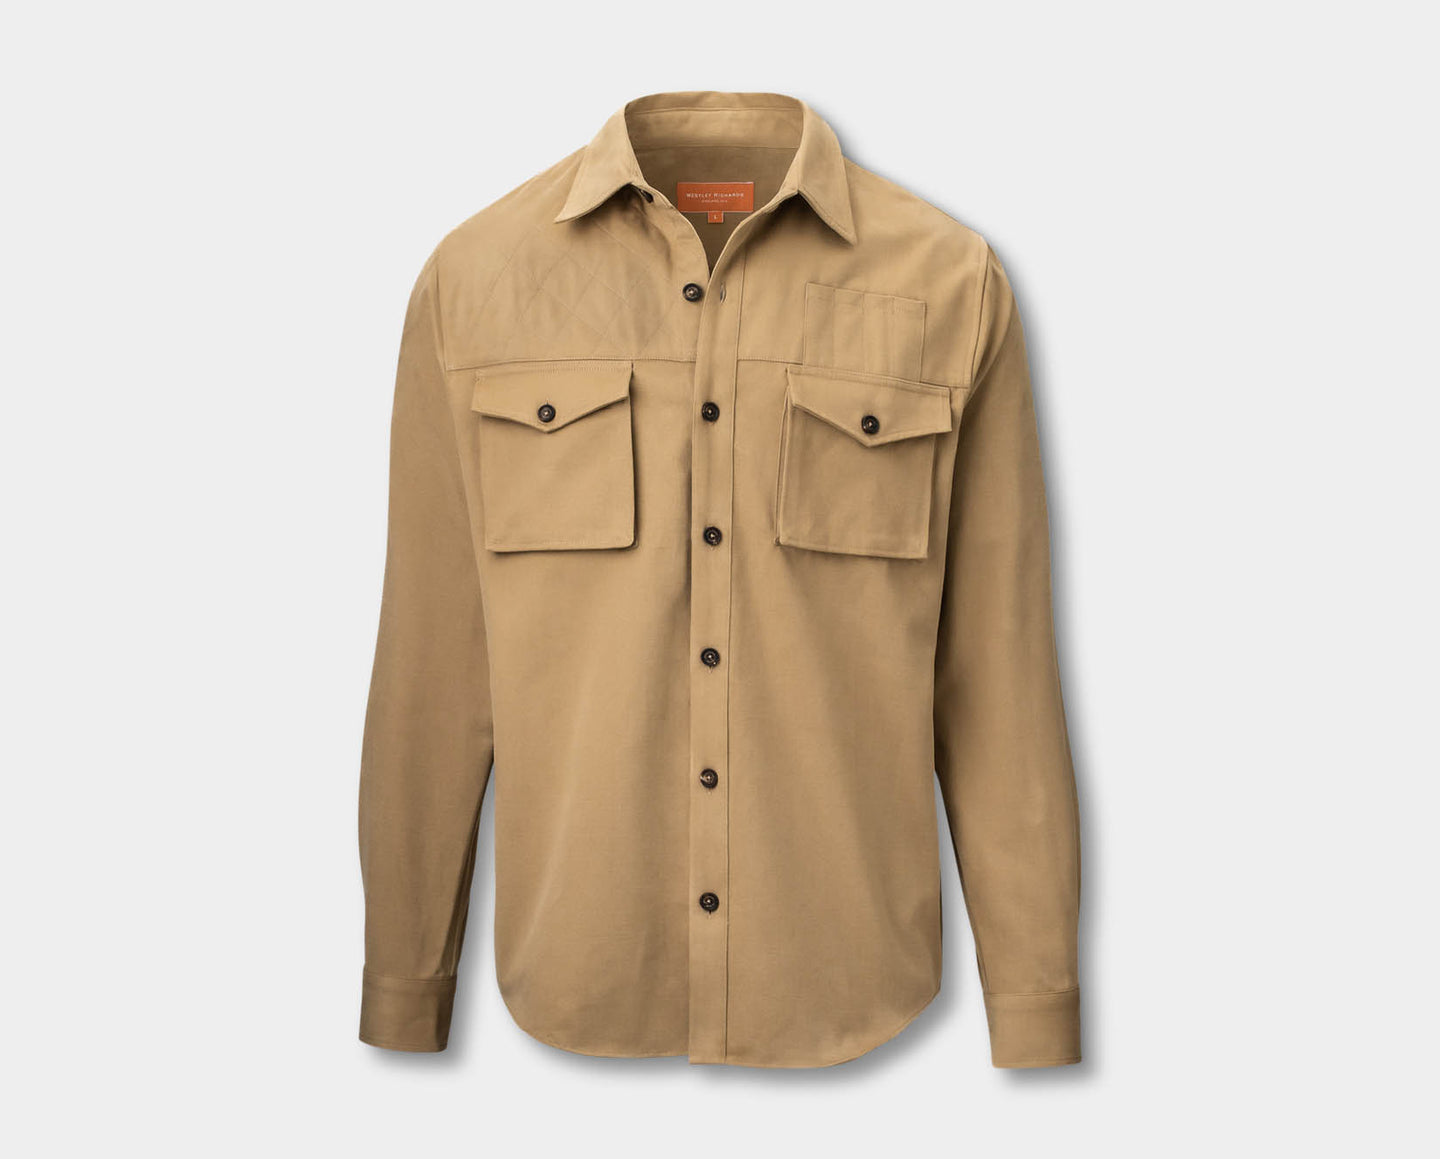 Expedition Shirt in Brushed Sand